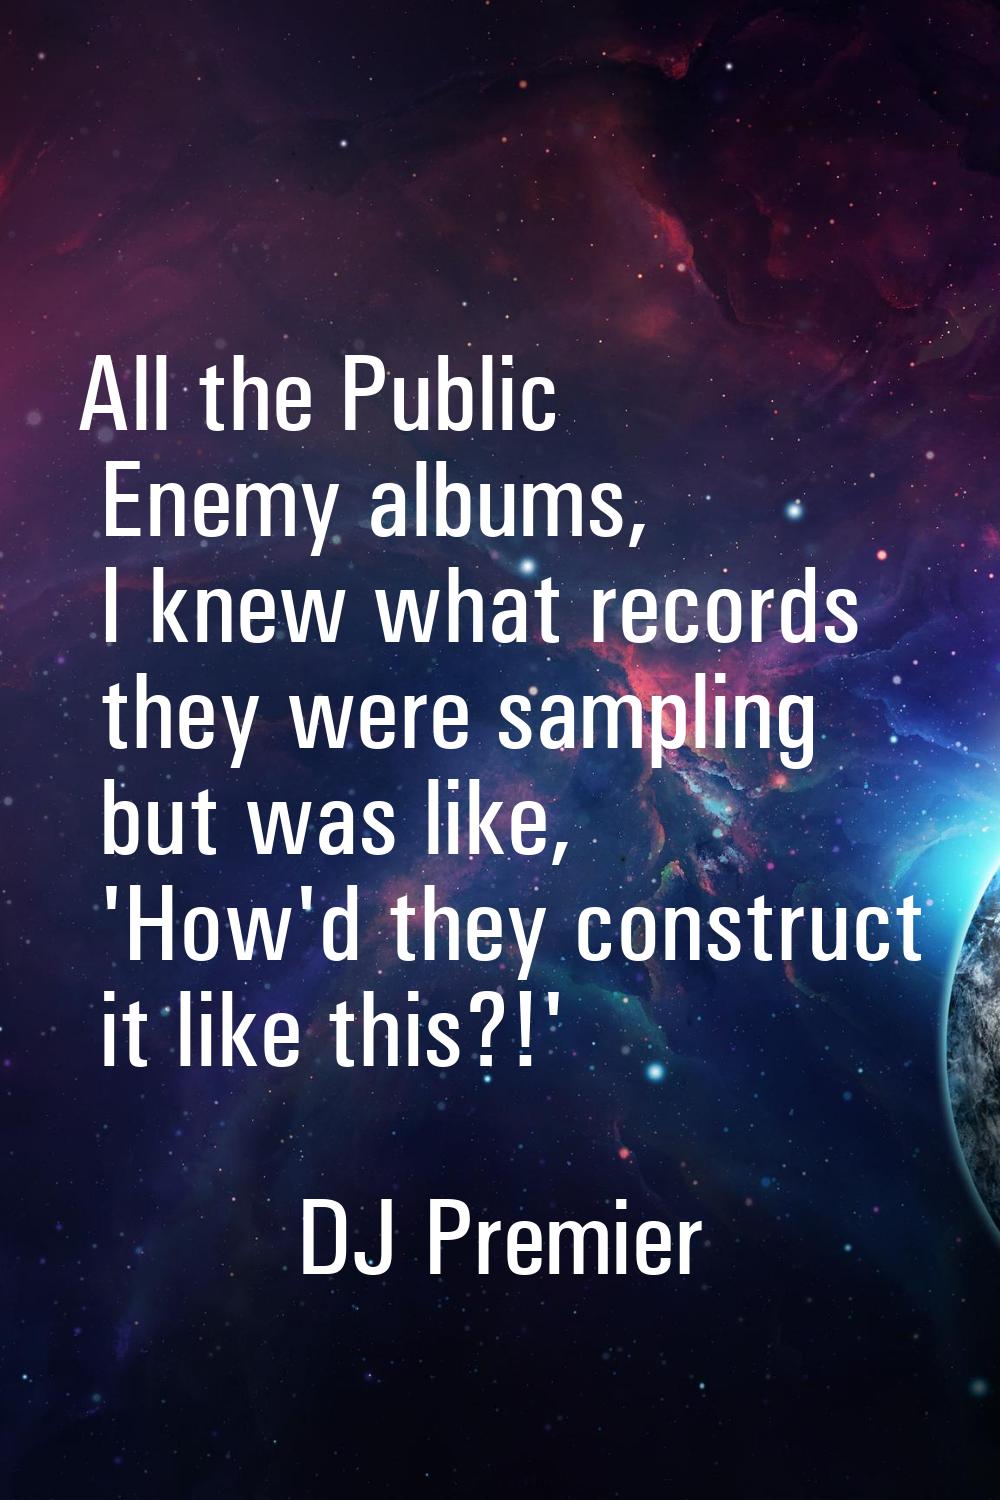 All the Public Enemy albums, I knew what records they were sampling but was like, 'How'd they const